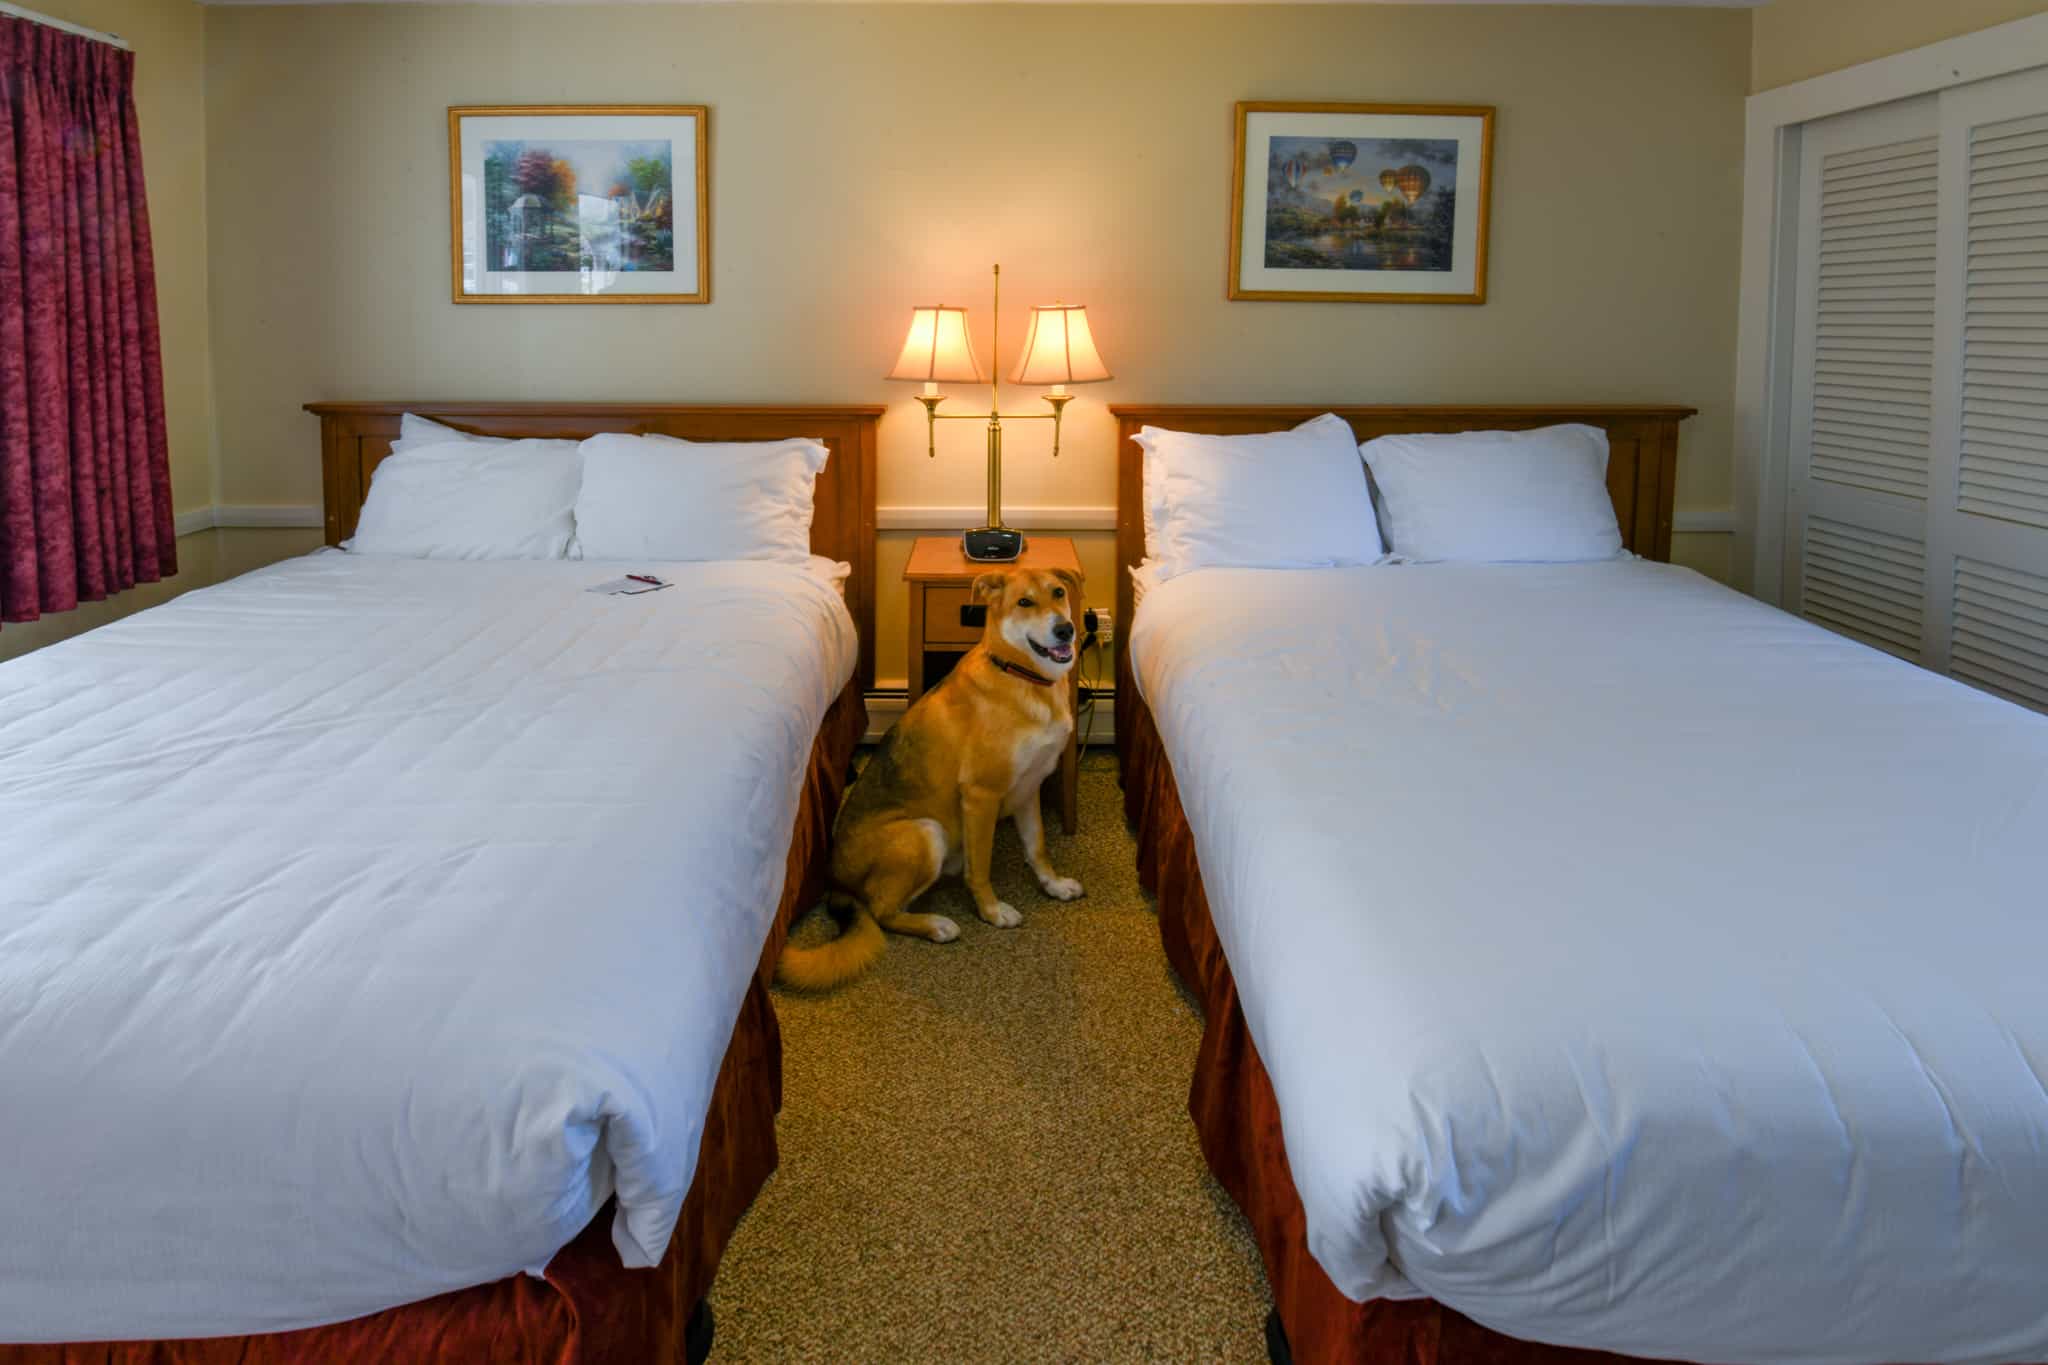 Village Place dog-friendly policy